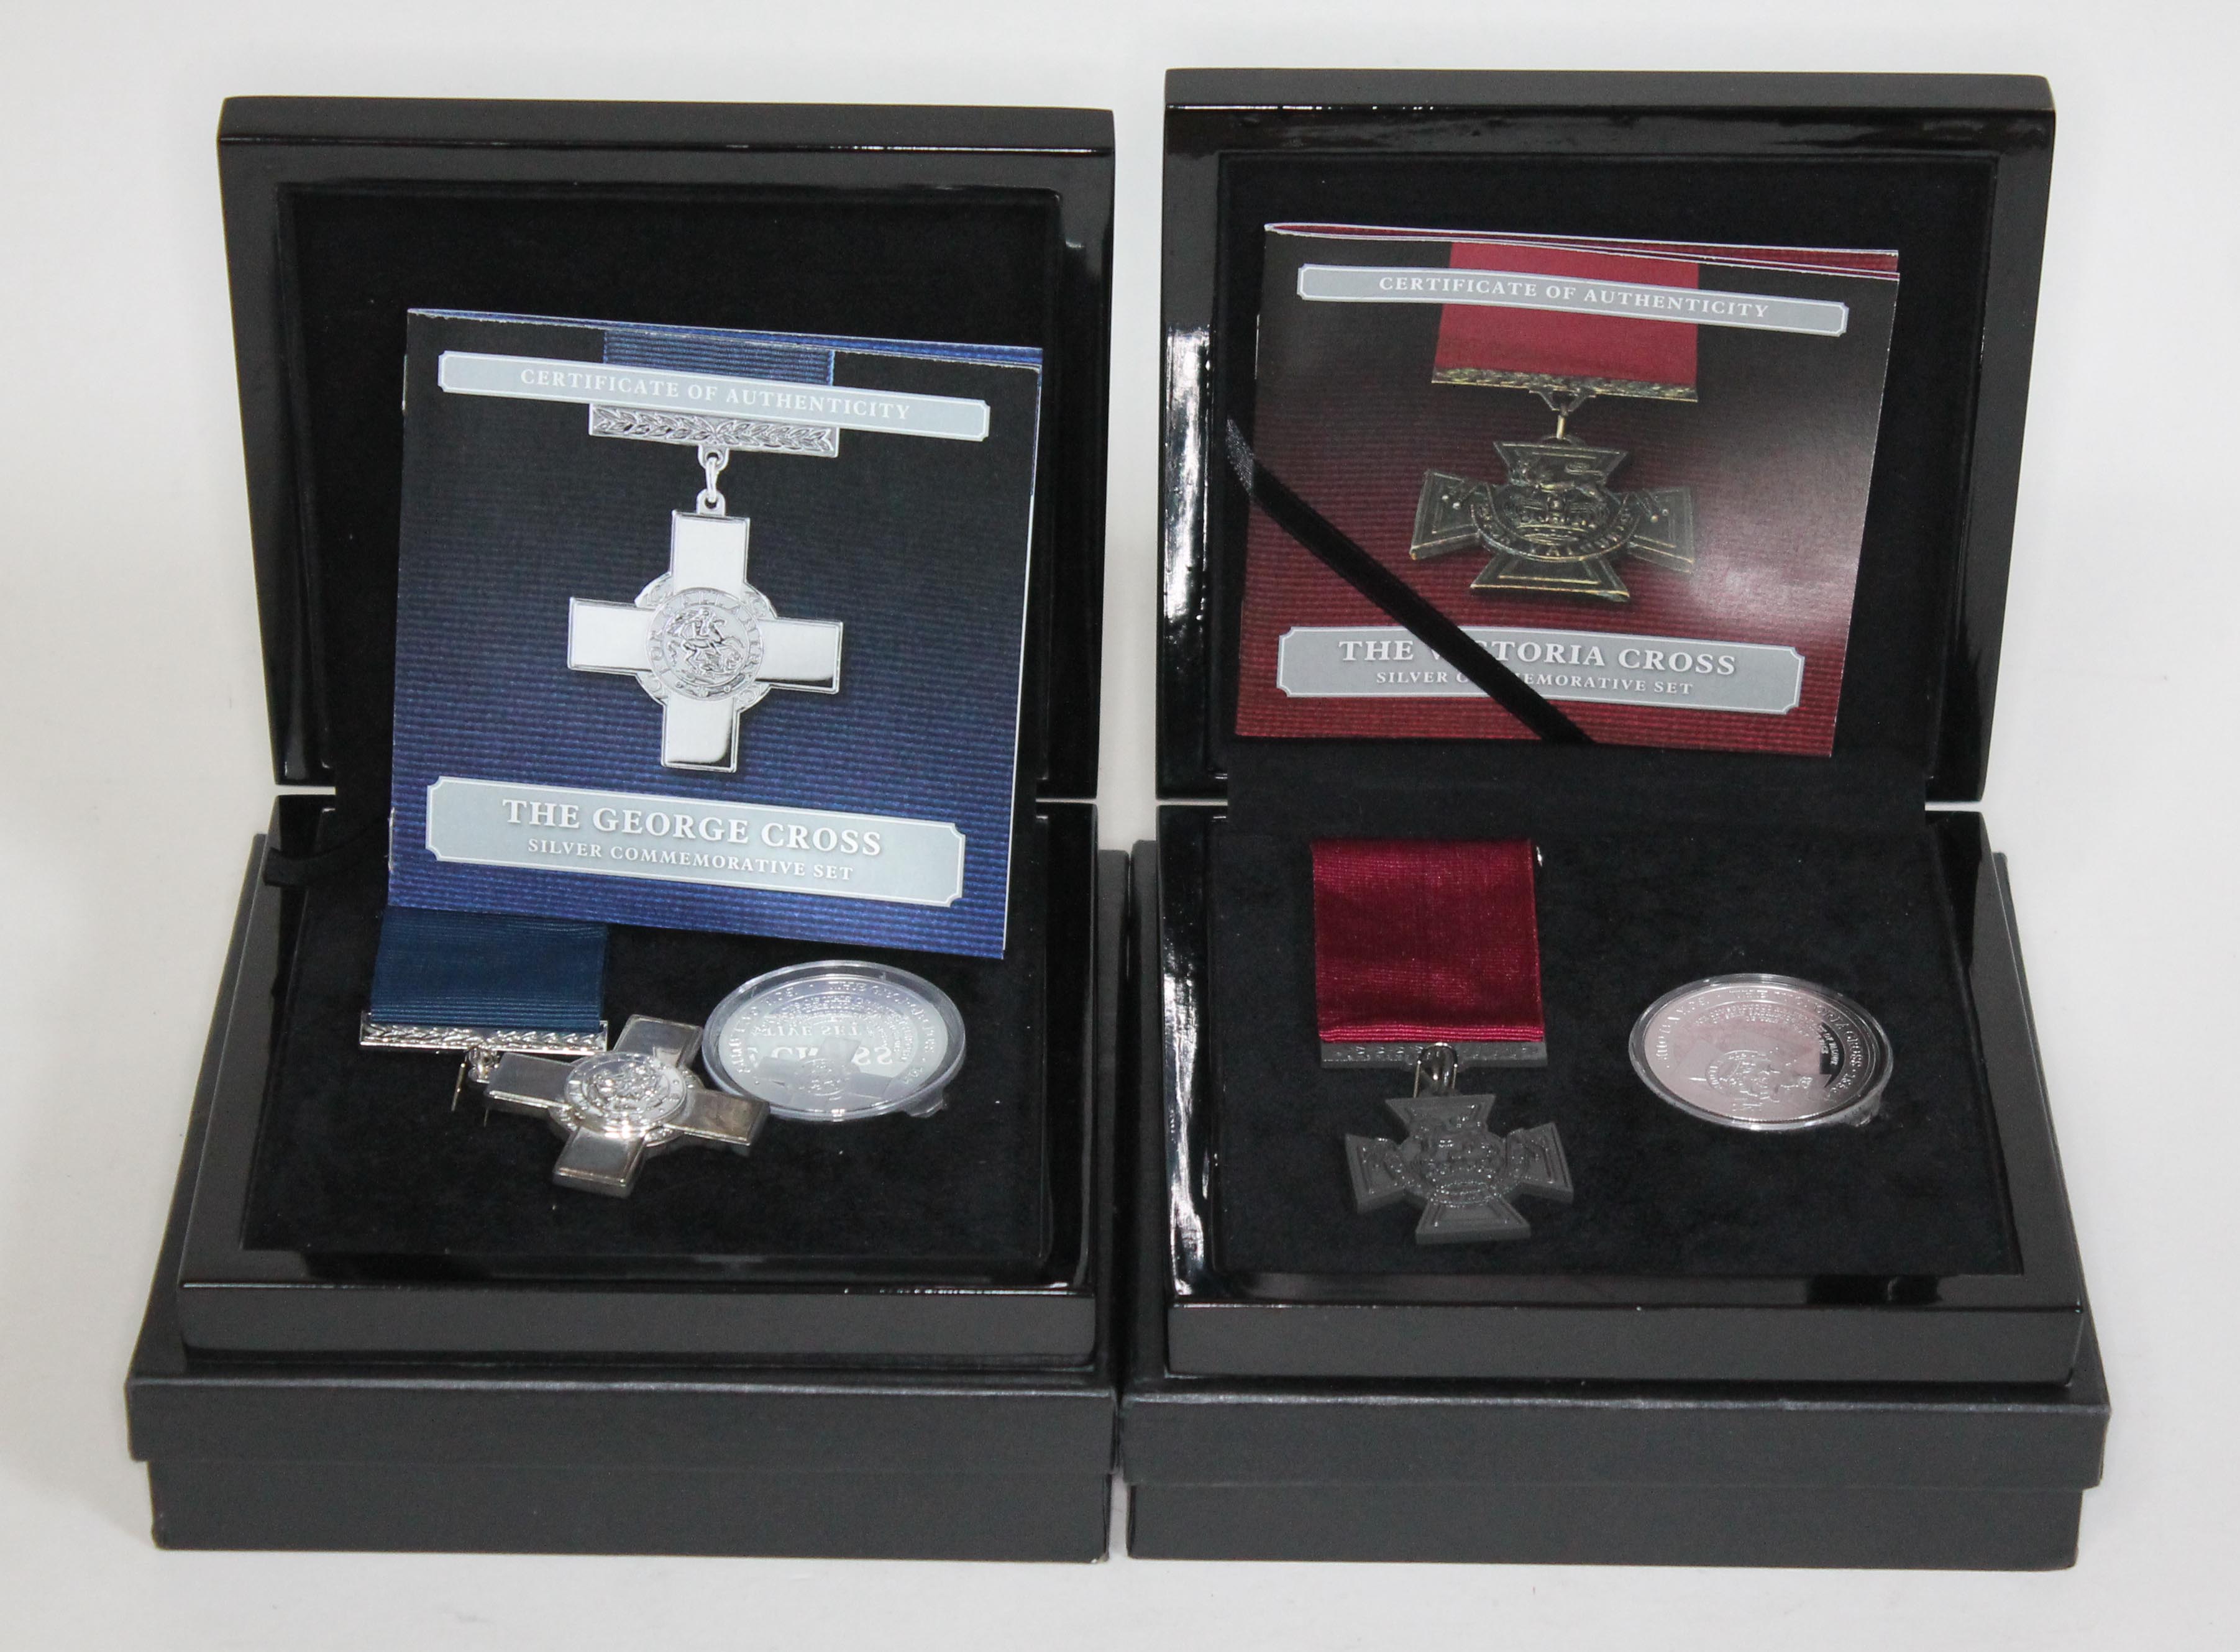 Two cased Bradford Exchange replica medal and silver proof coin sets: 'The George Cross' and 'The